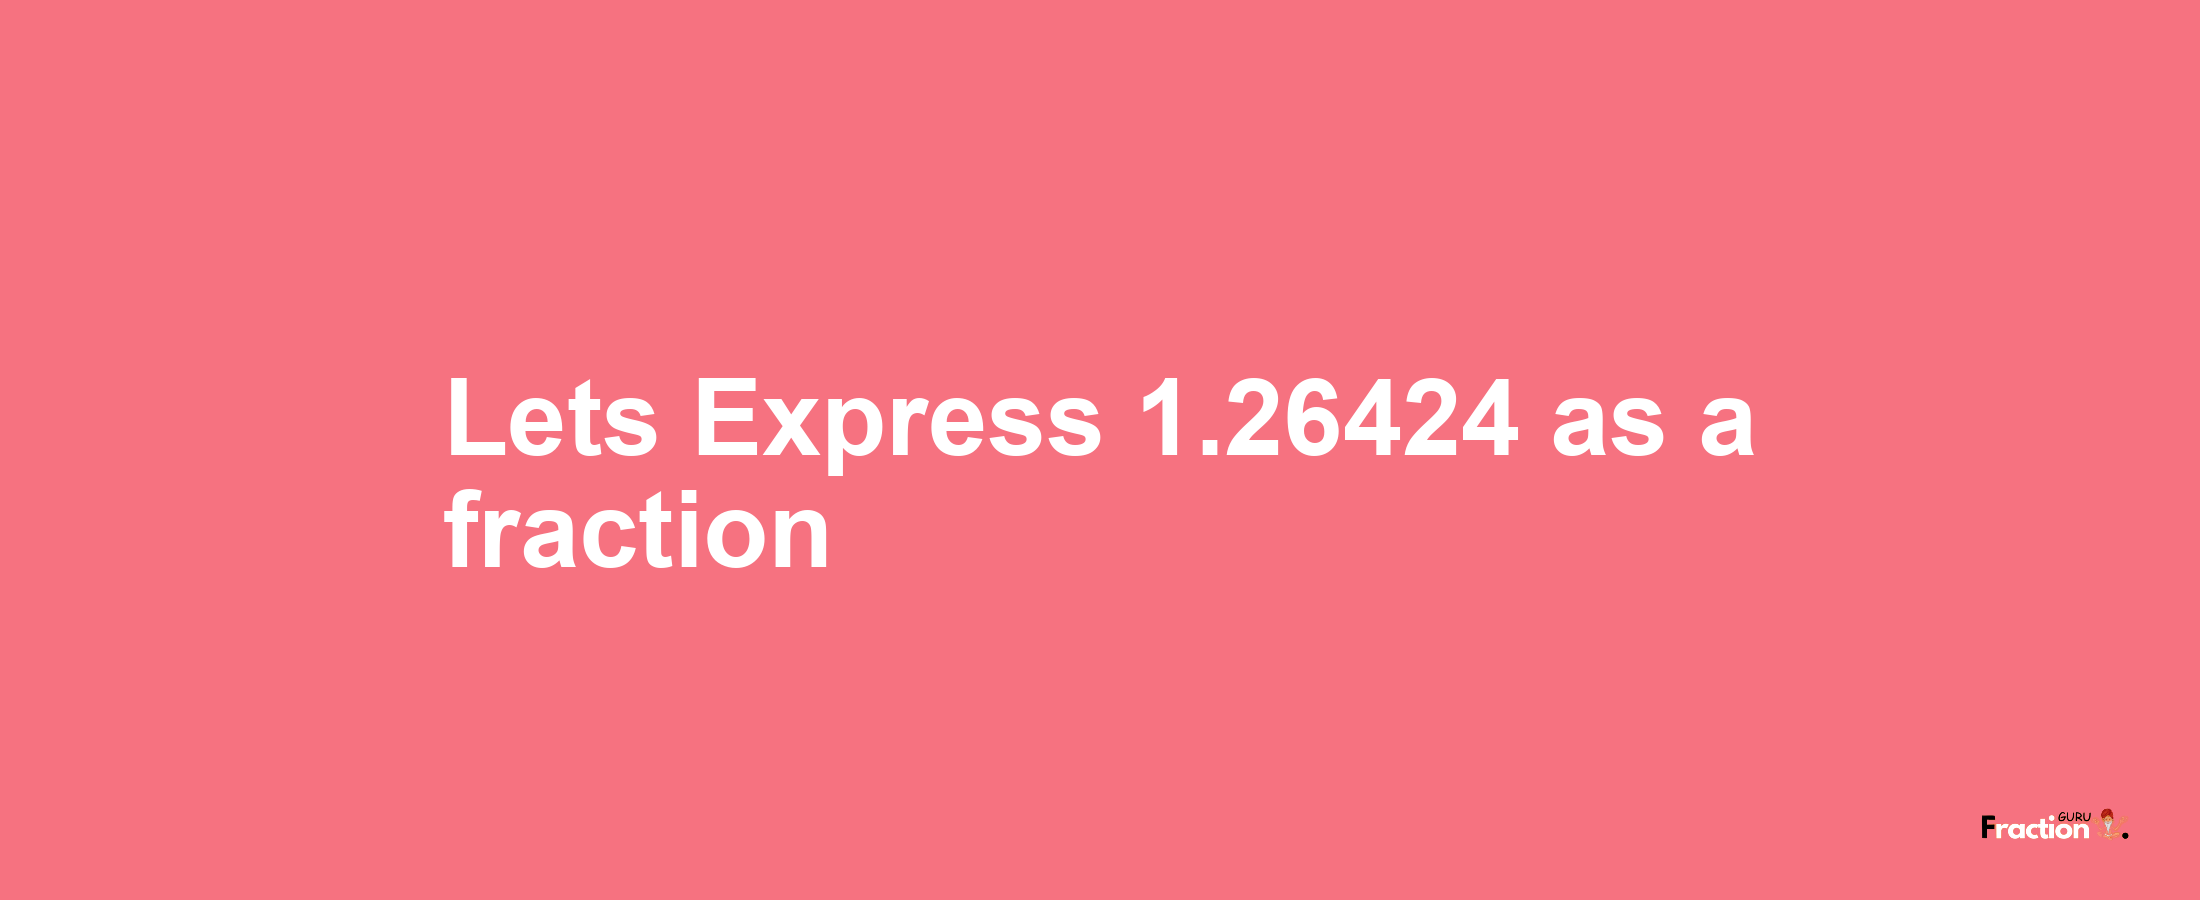 Lets Express 1.26424 as afraction